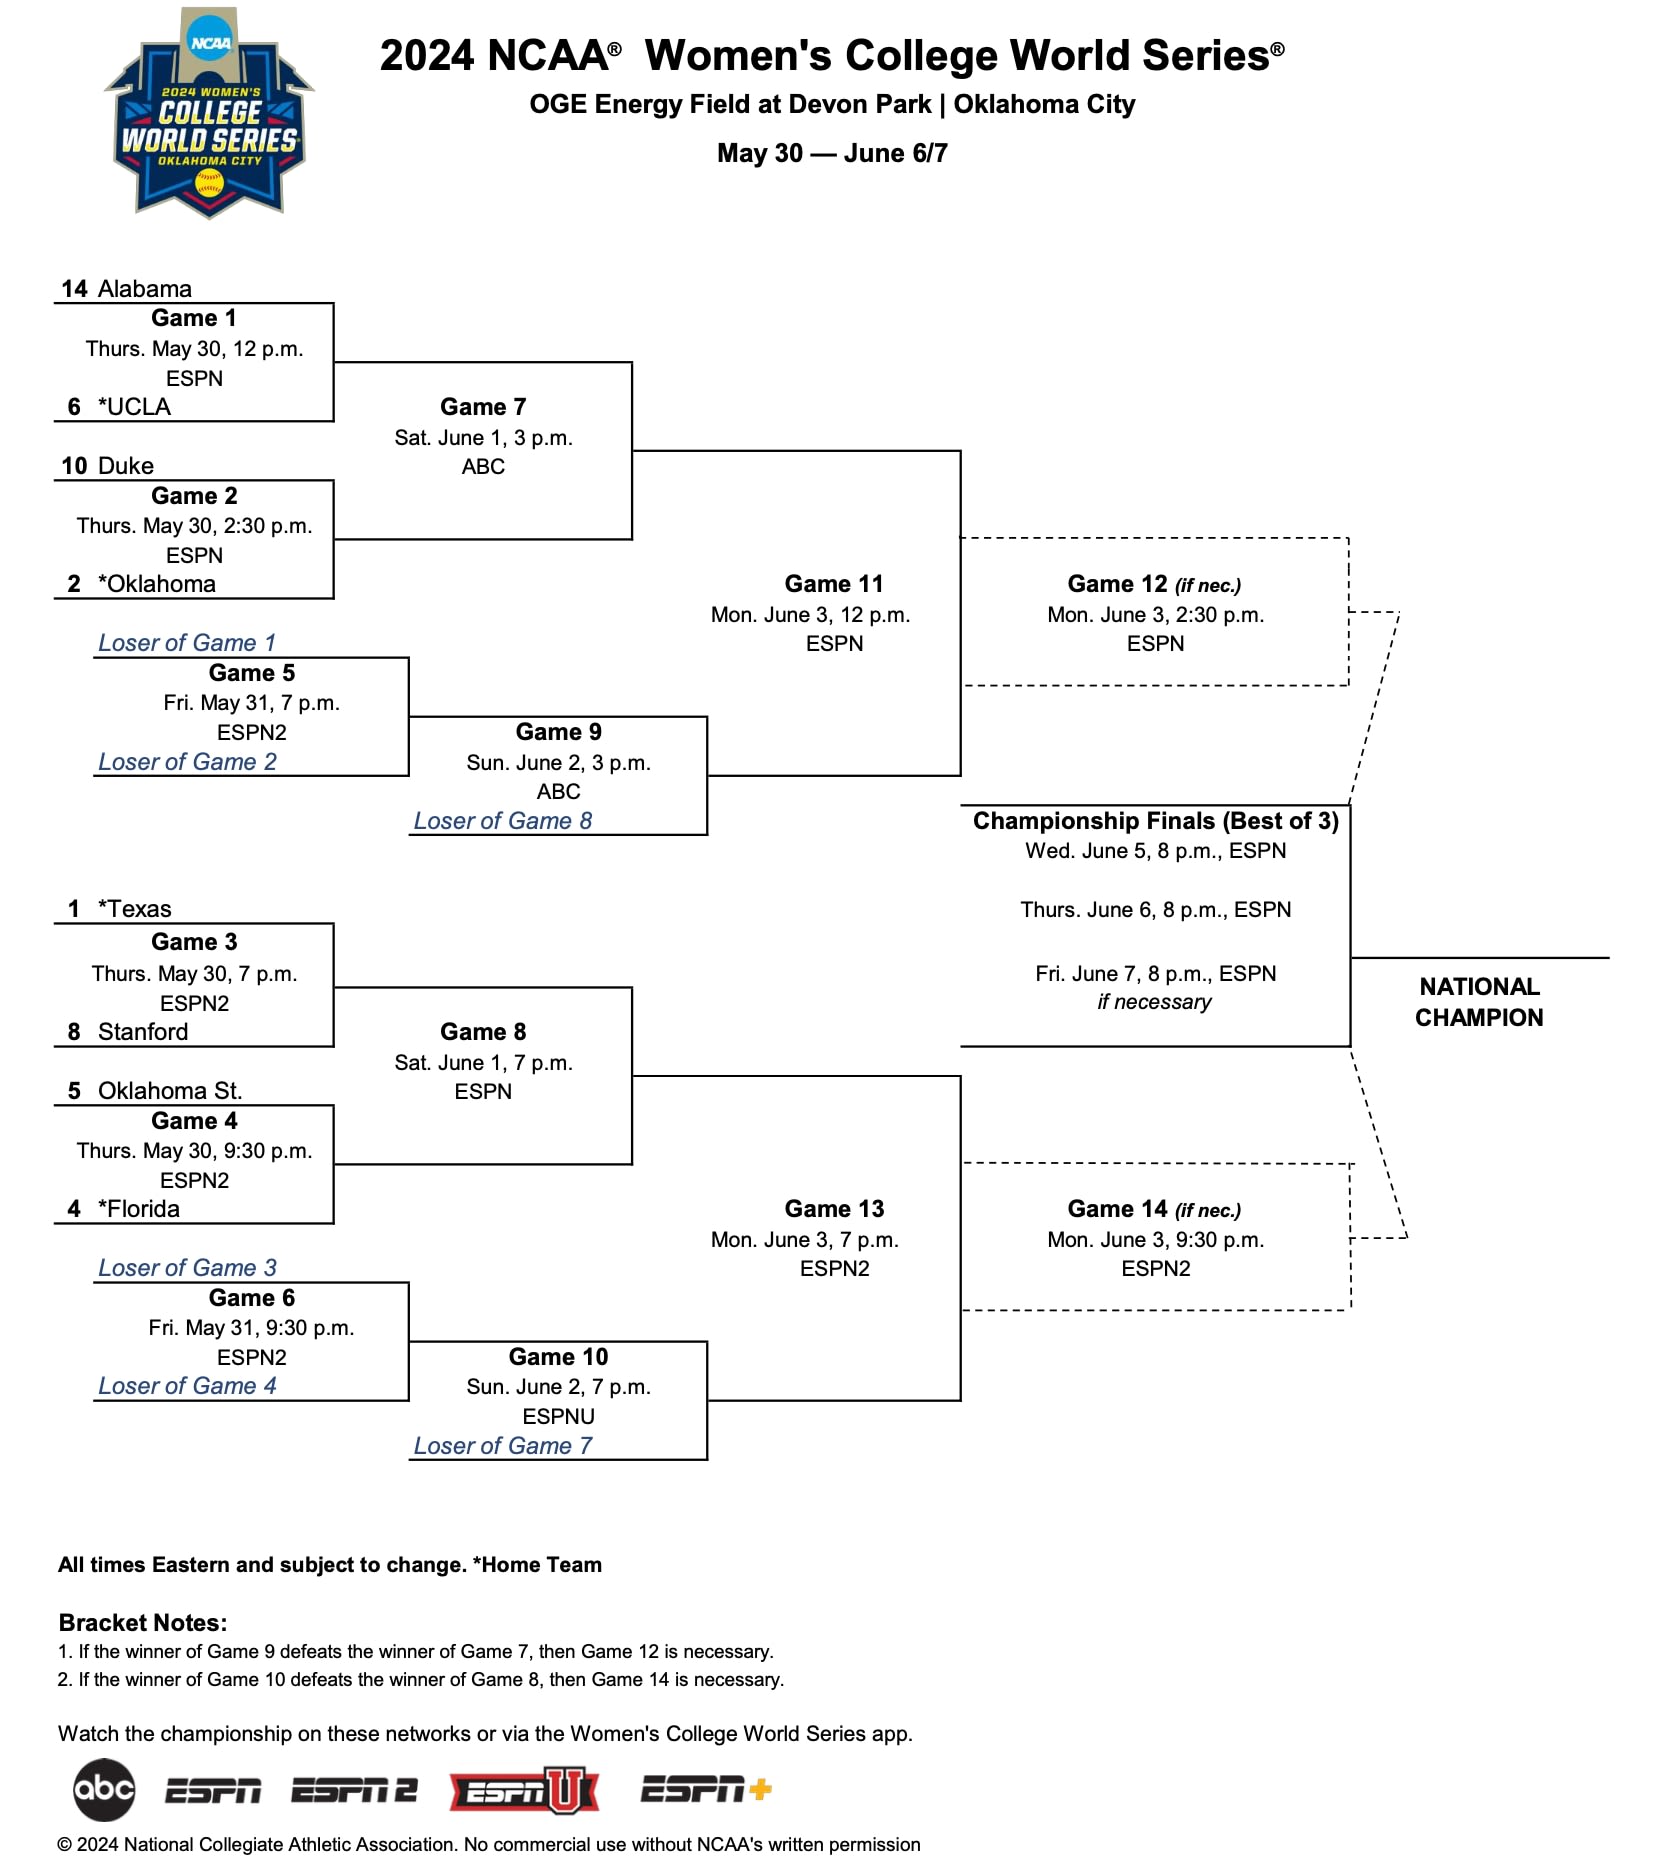 WCWS bracket: Schedule, TV channels, streaming, scores for NCAA softball tournament games